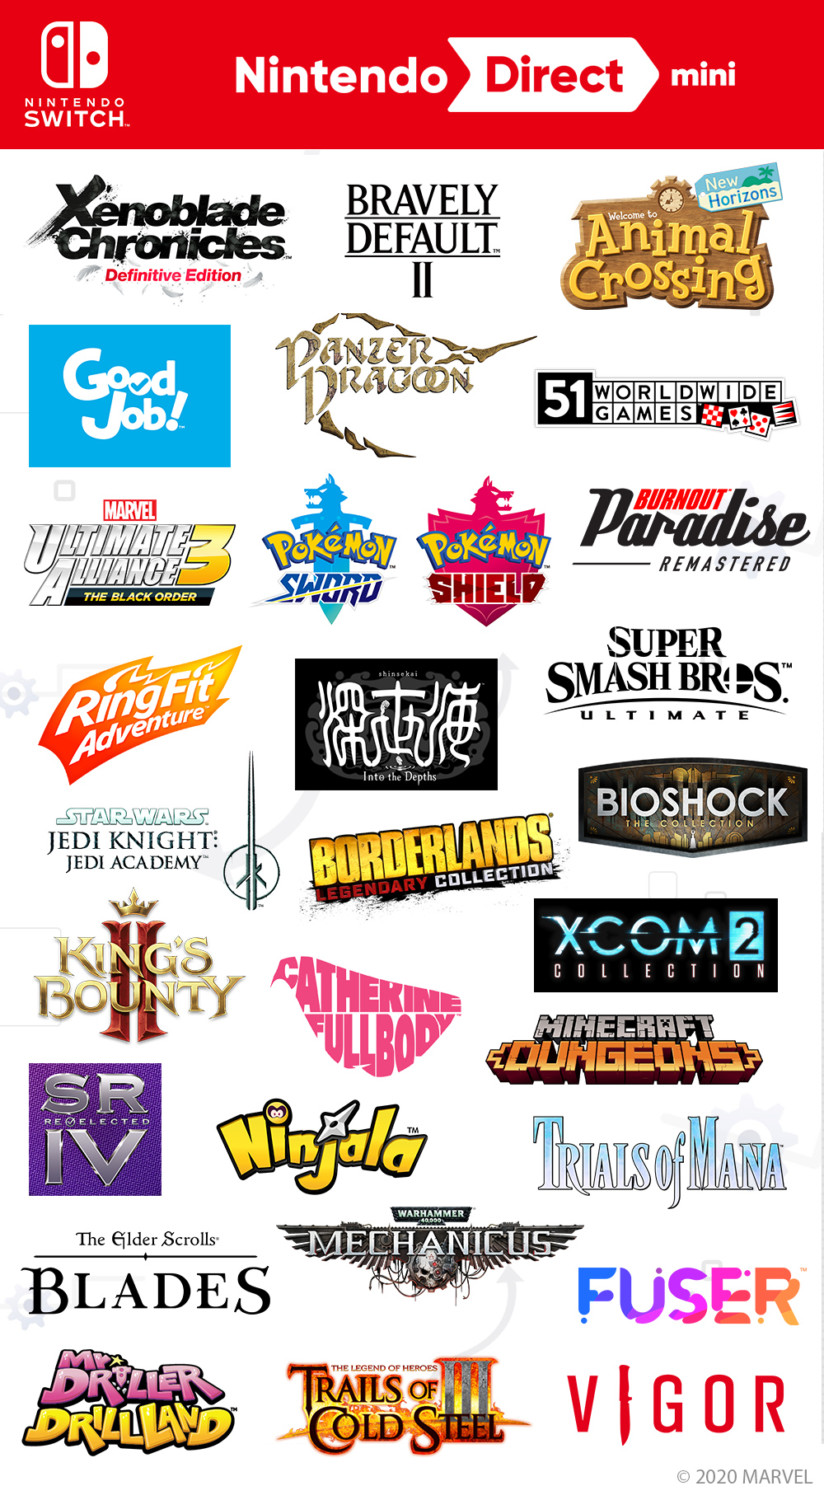 Nintendo Direct February 2022: A List of All Games Announced